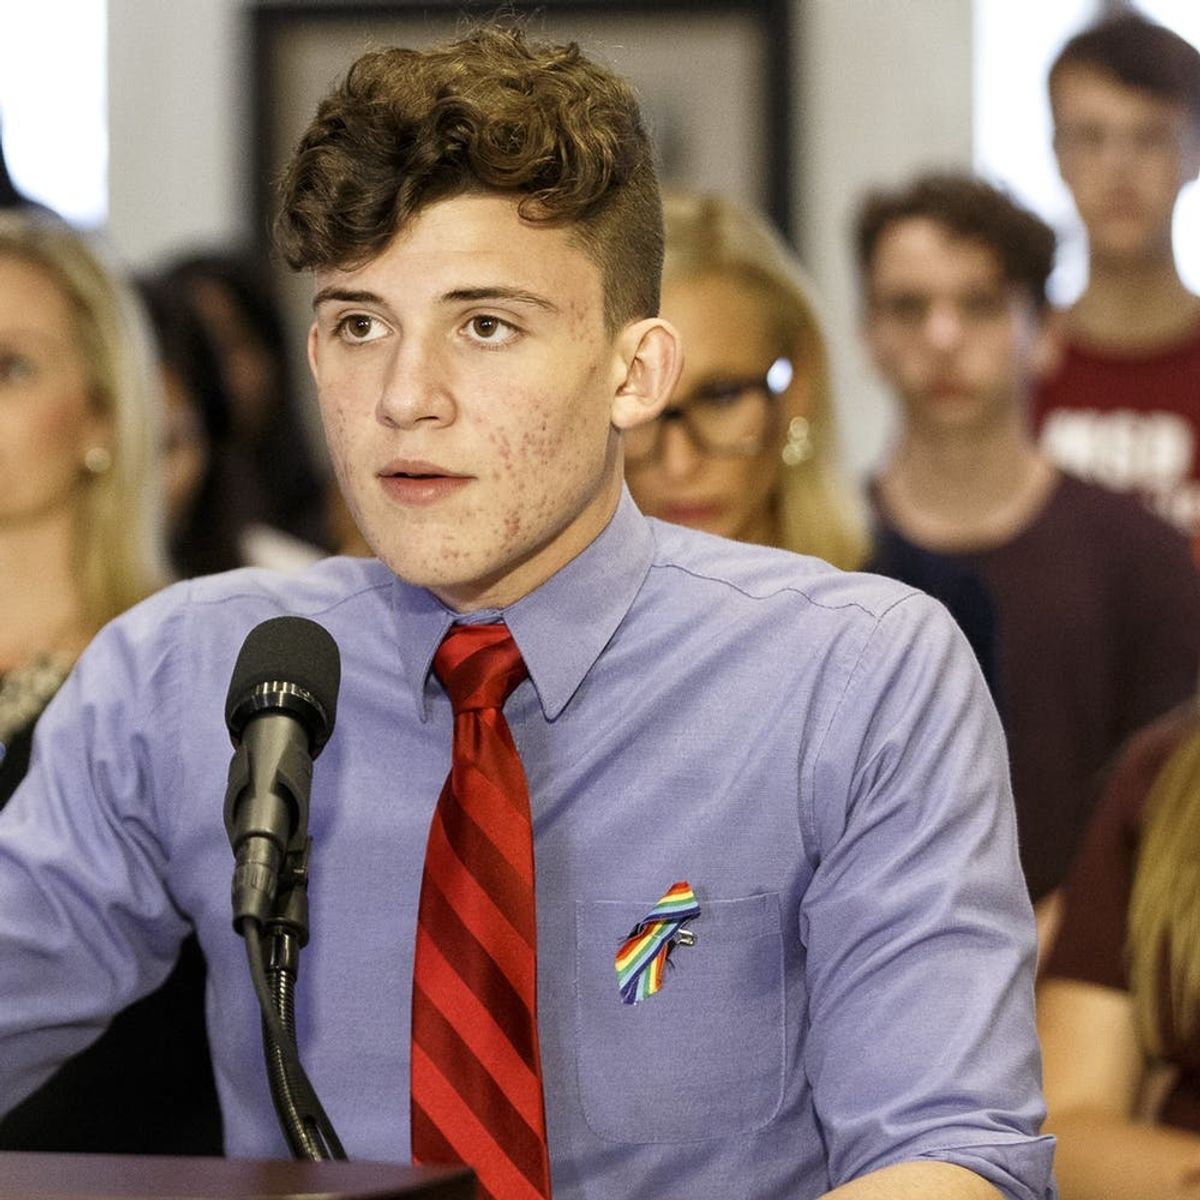 Parkland Survivors Took on Marco Rubio and the NRA in a Tense Town Hall Meeting